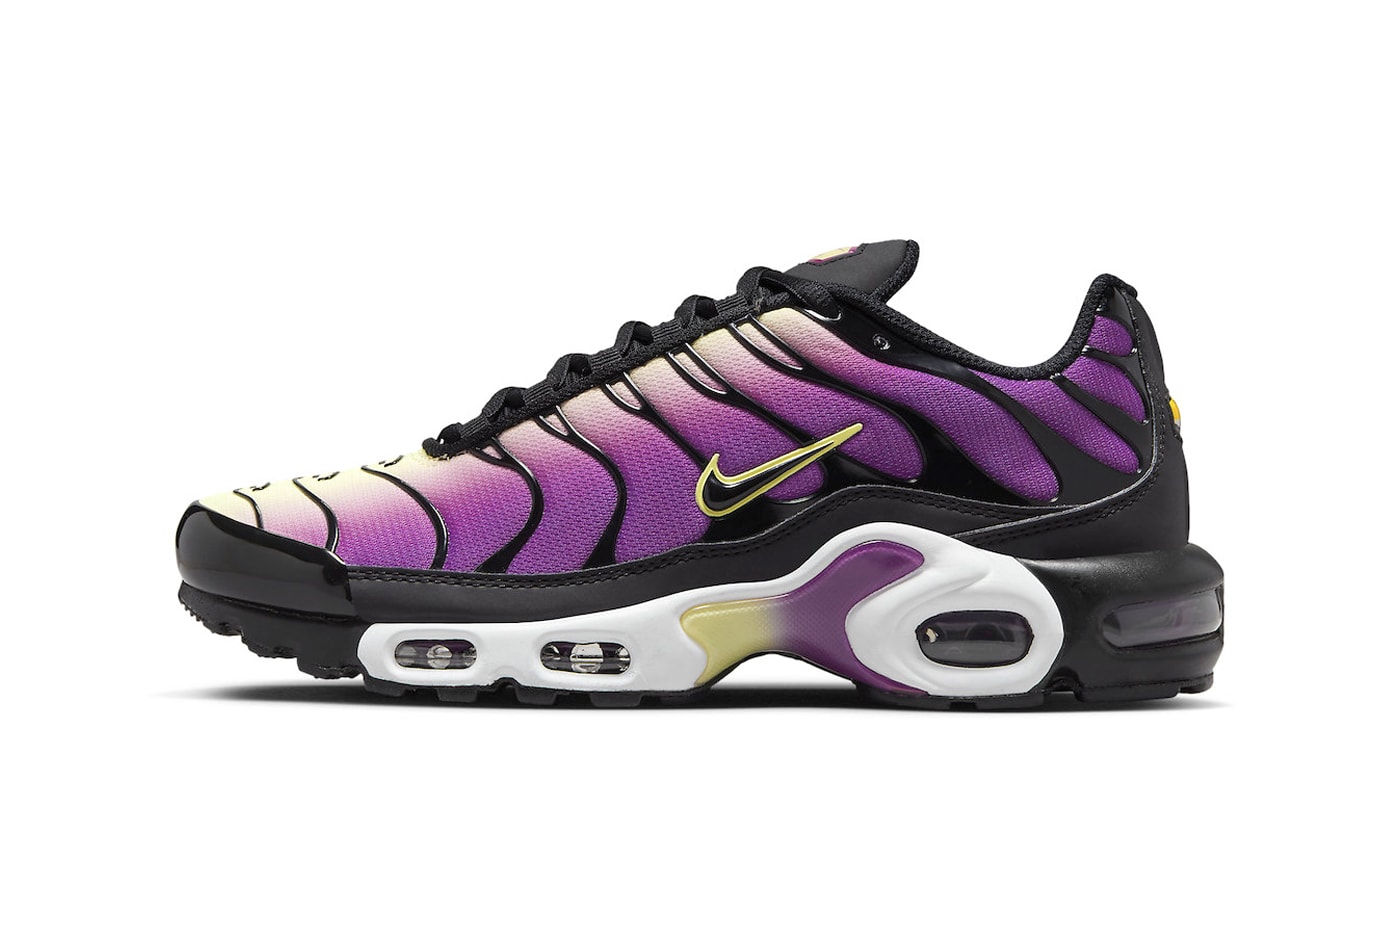 Latest Nike Air Max Plus Appears in NOCTA-Inspired Purple/Yellow Gradient FN3485-001 drake swoosh heat tech puchisa pale yellow